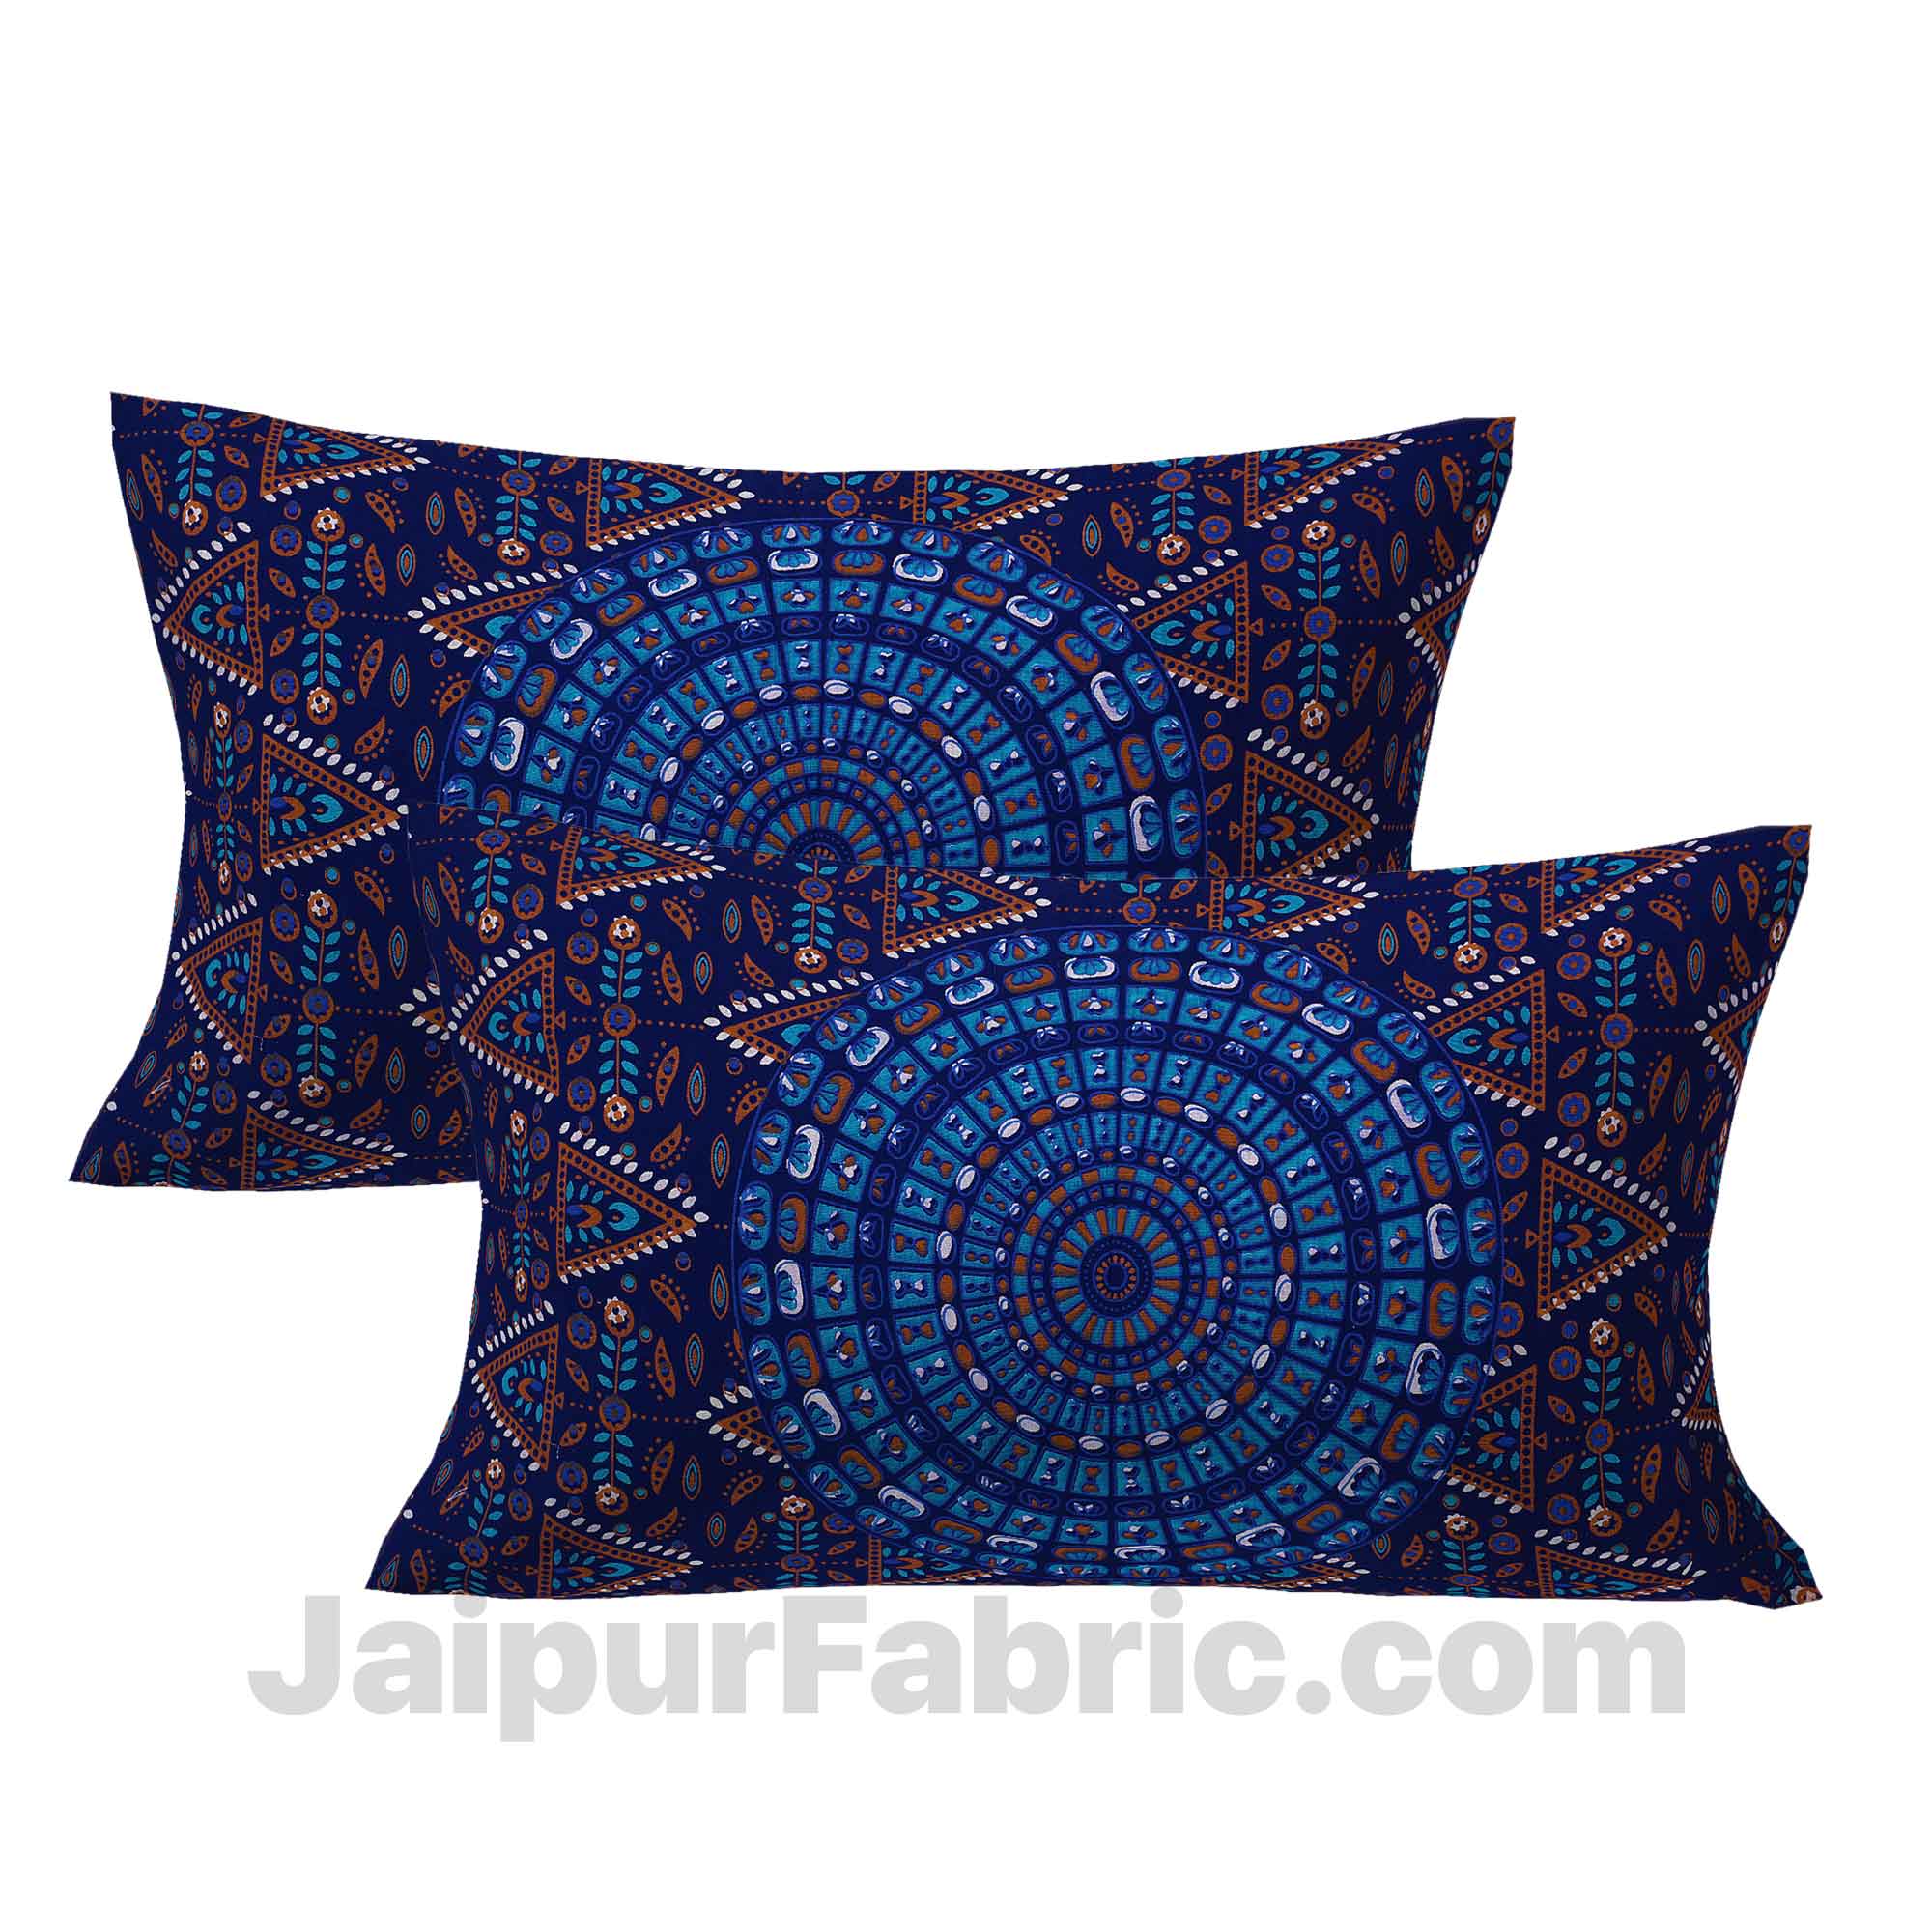 Pure Cotton Blue Mandala Zig Zag Print King Size Double Bedsheet With 2 Pillow Covers